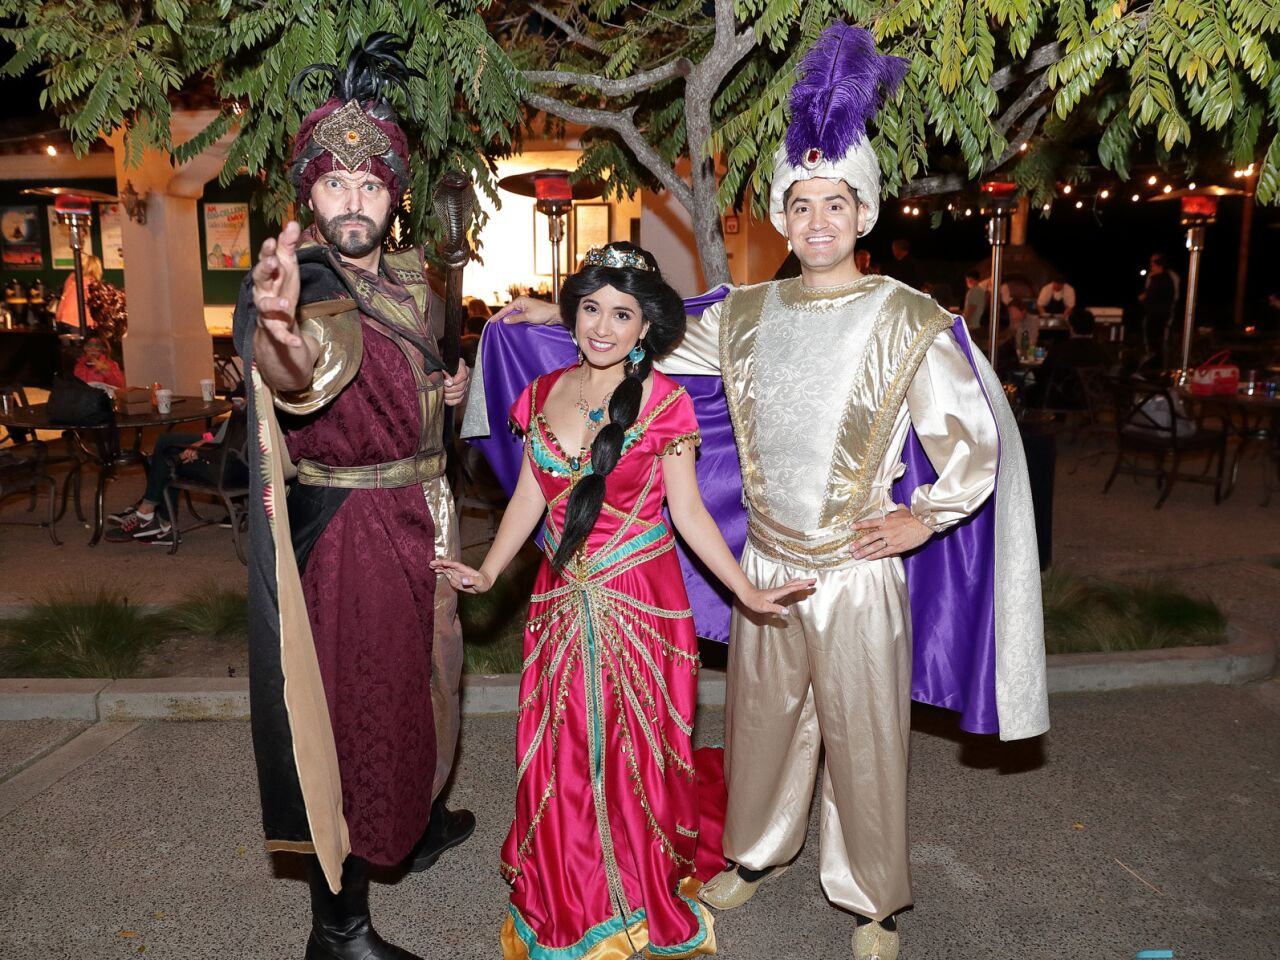 Characters were on hand to pose with the children: Jafar, Jasmine, and Aladdin